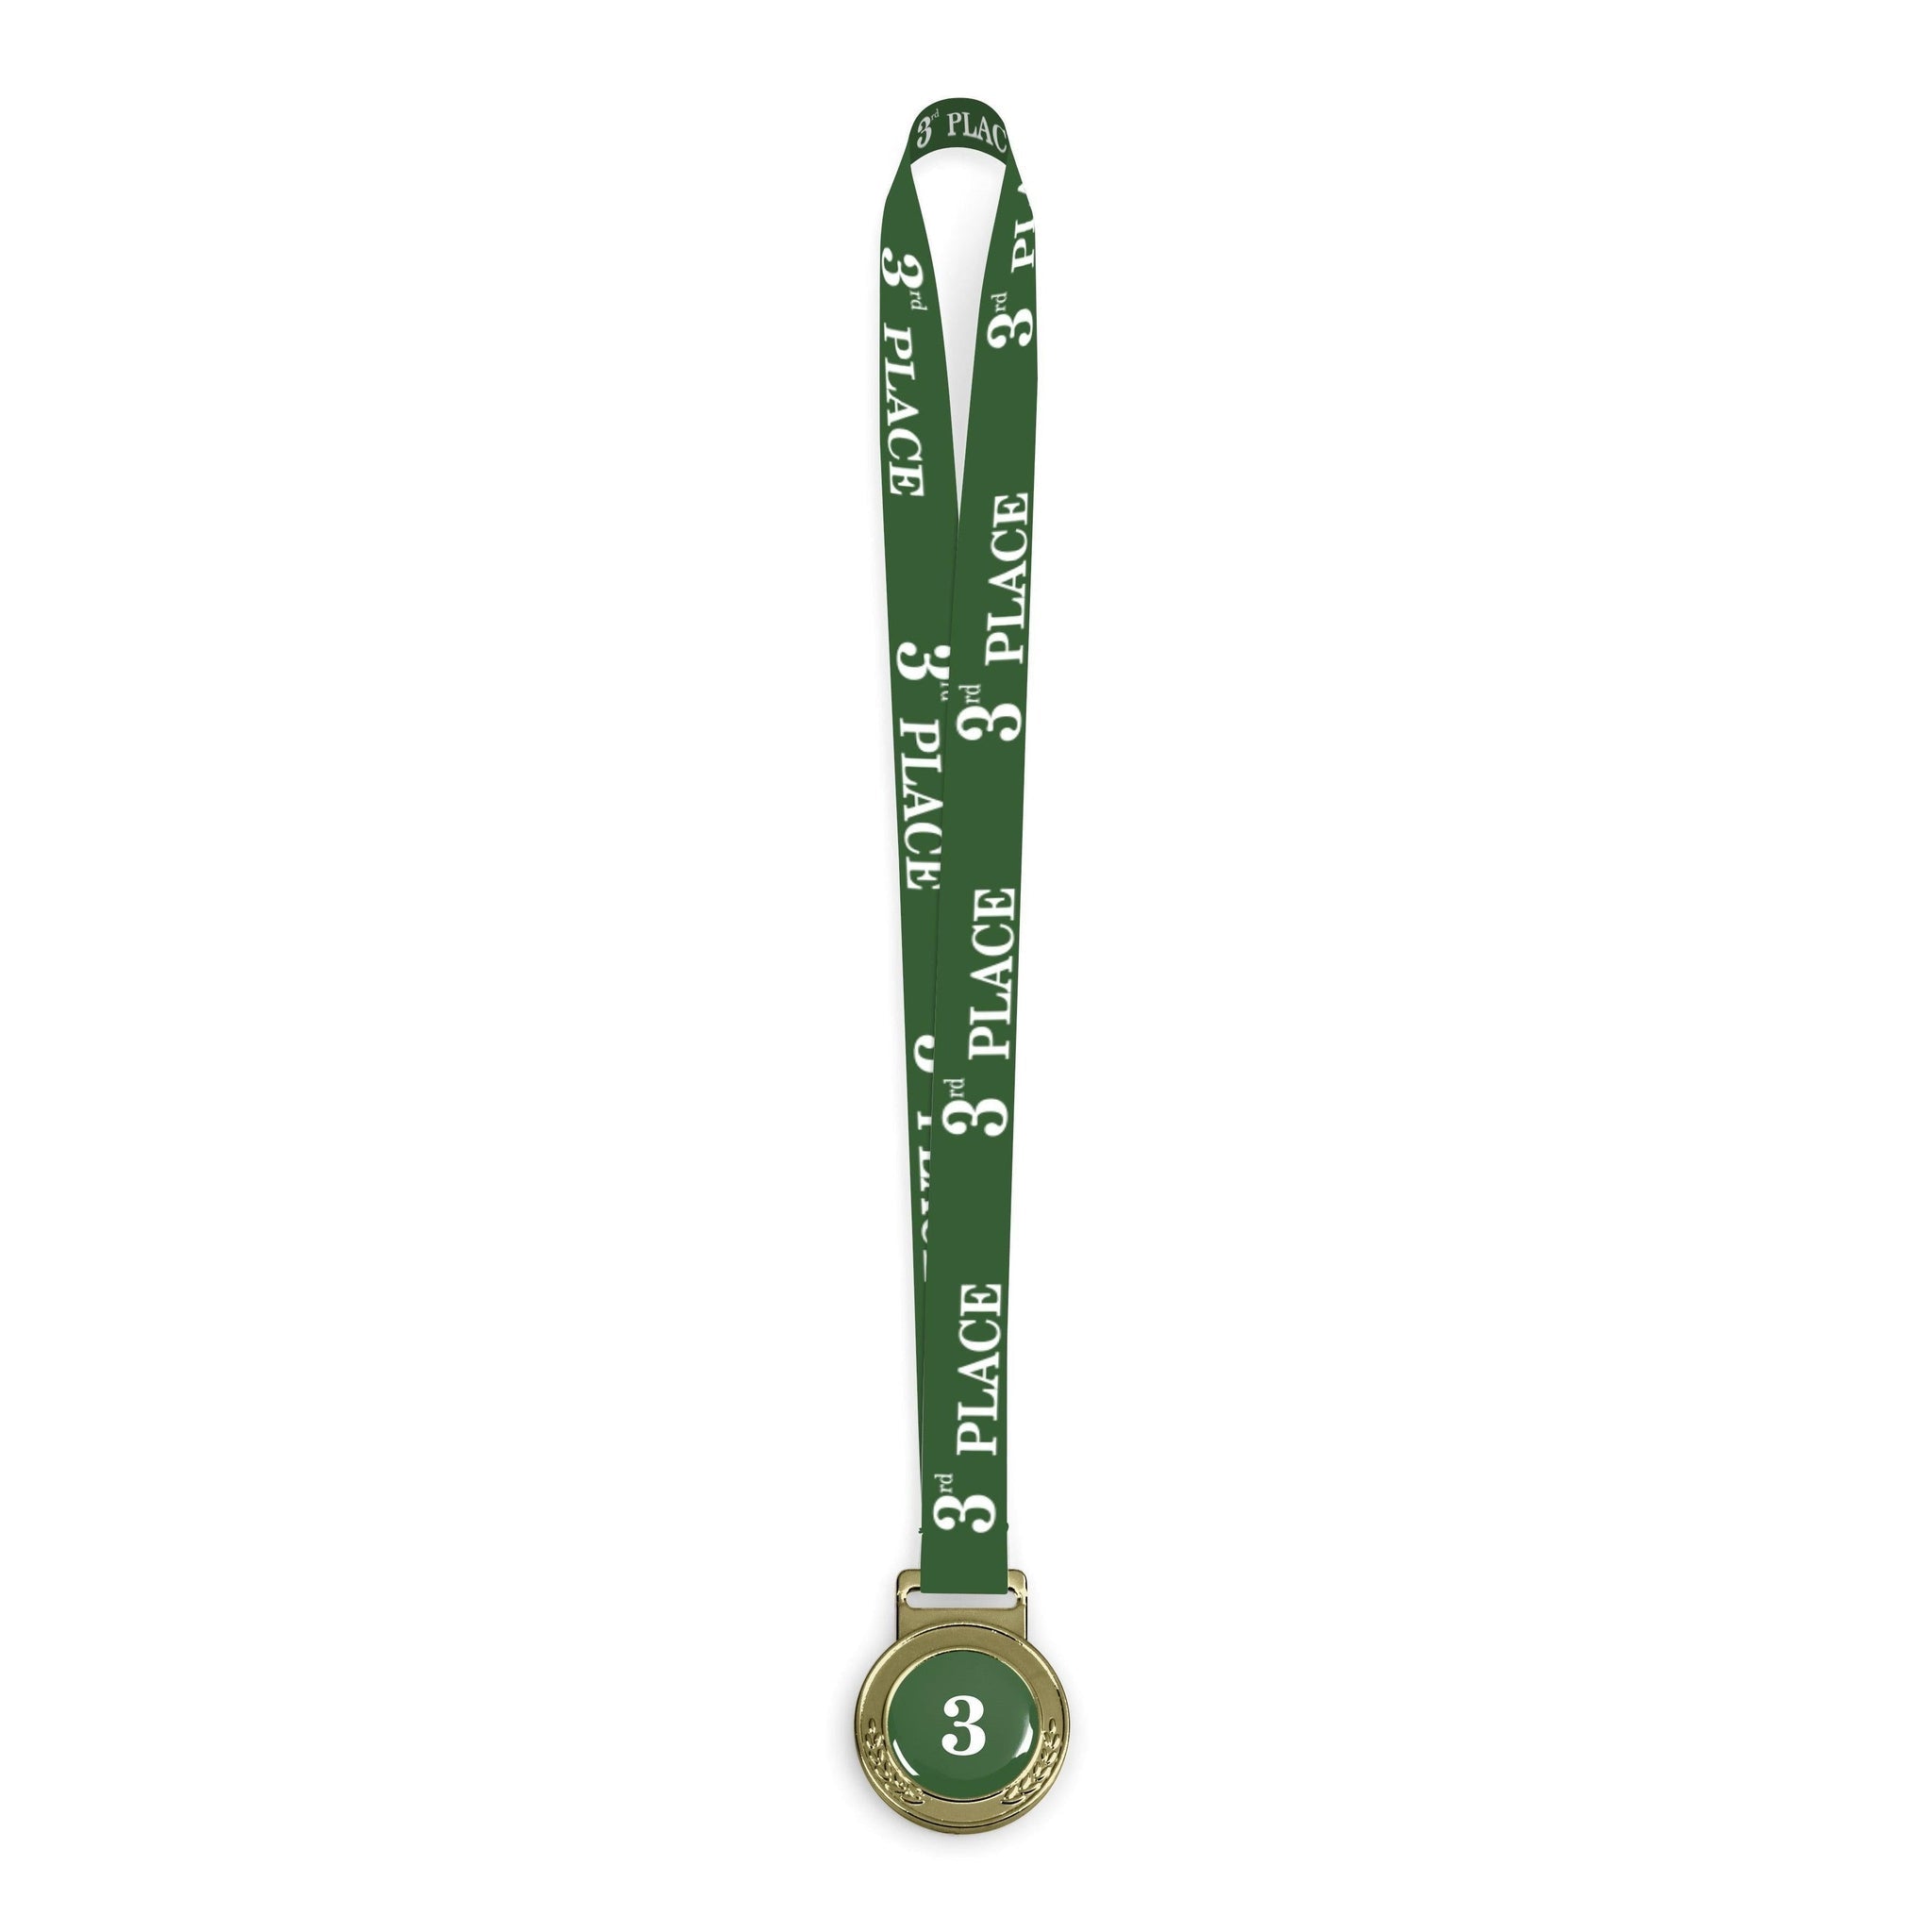 A fully branded bronze medal award attached to a dark green customized satin lanyard with white text. The number 3 is printed on the medal